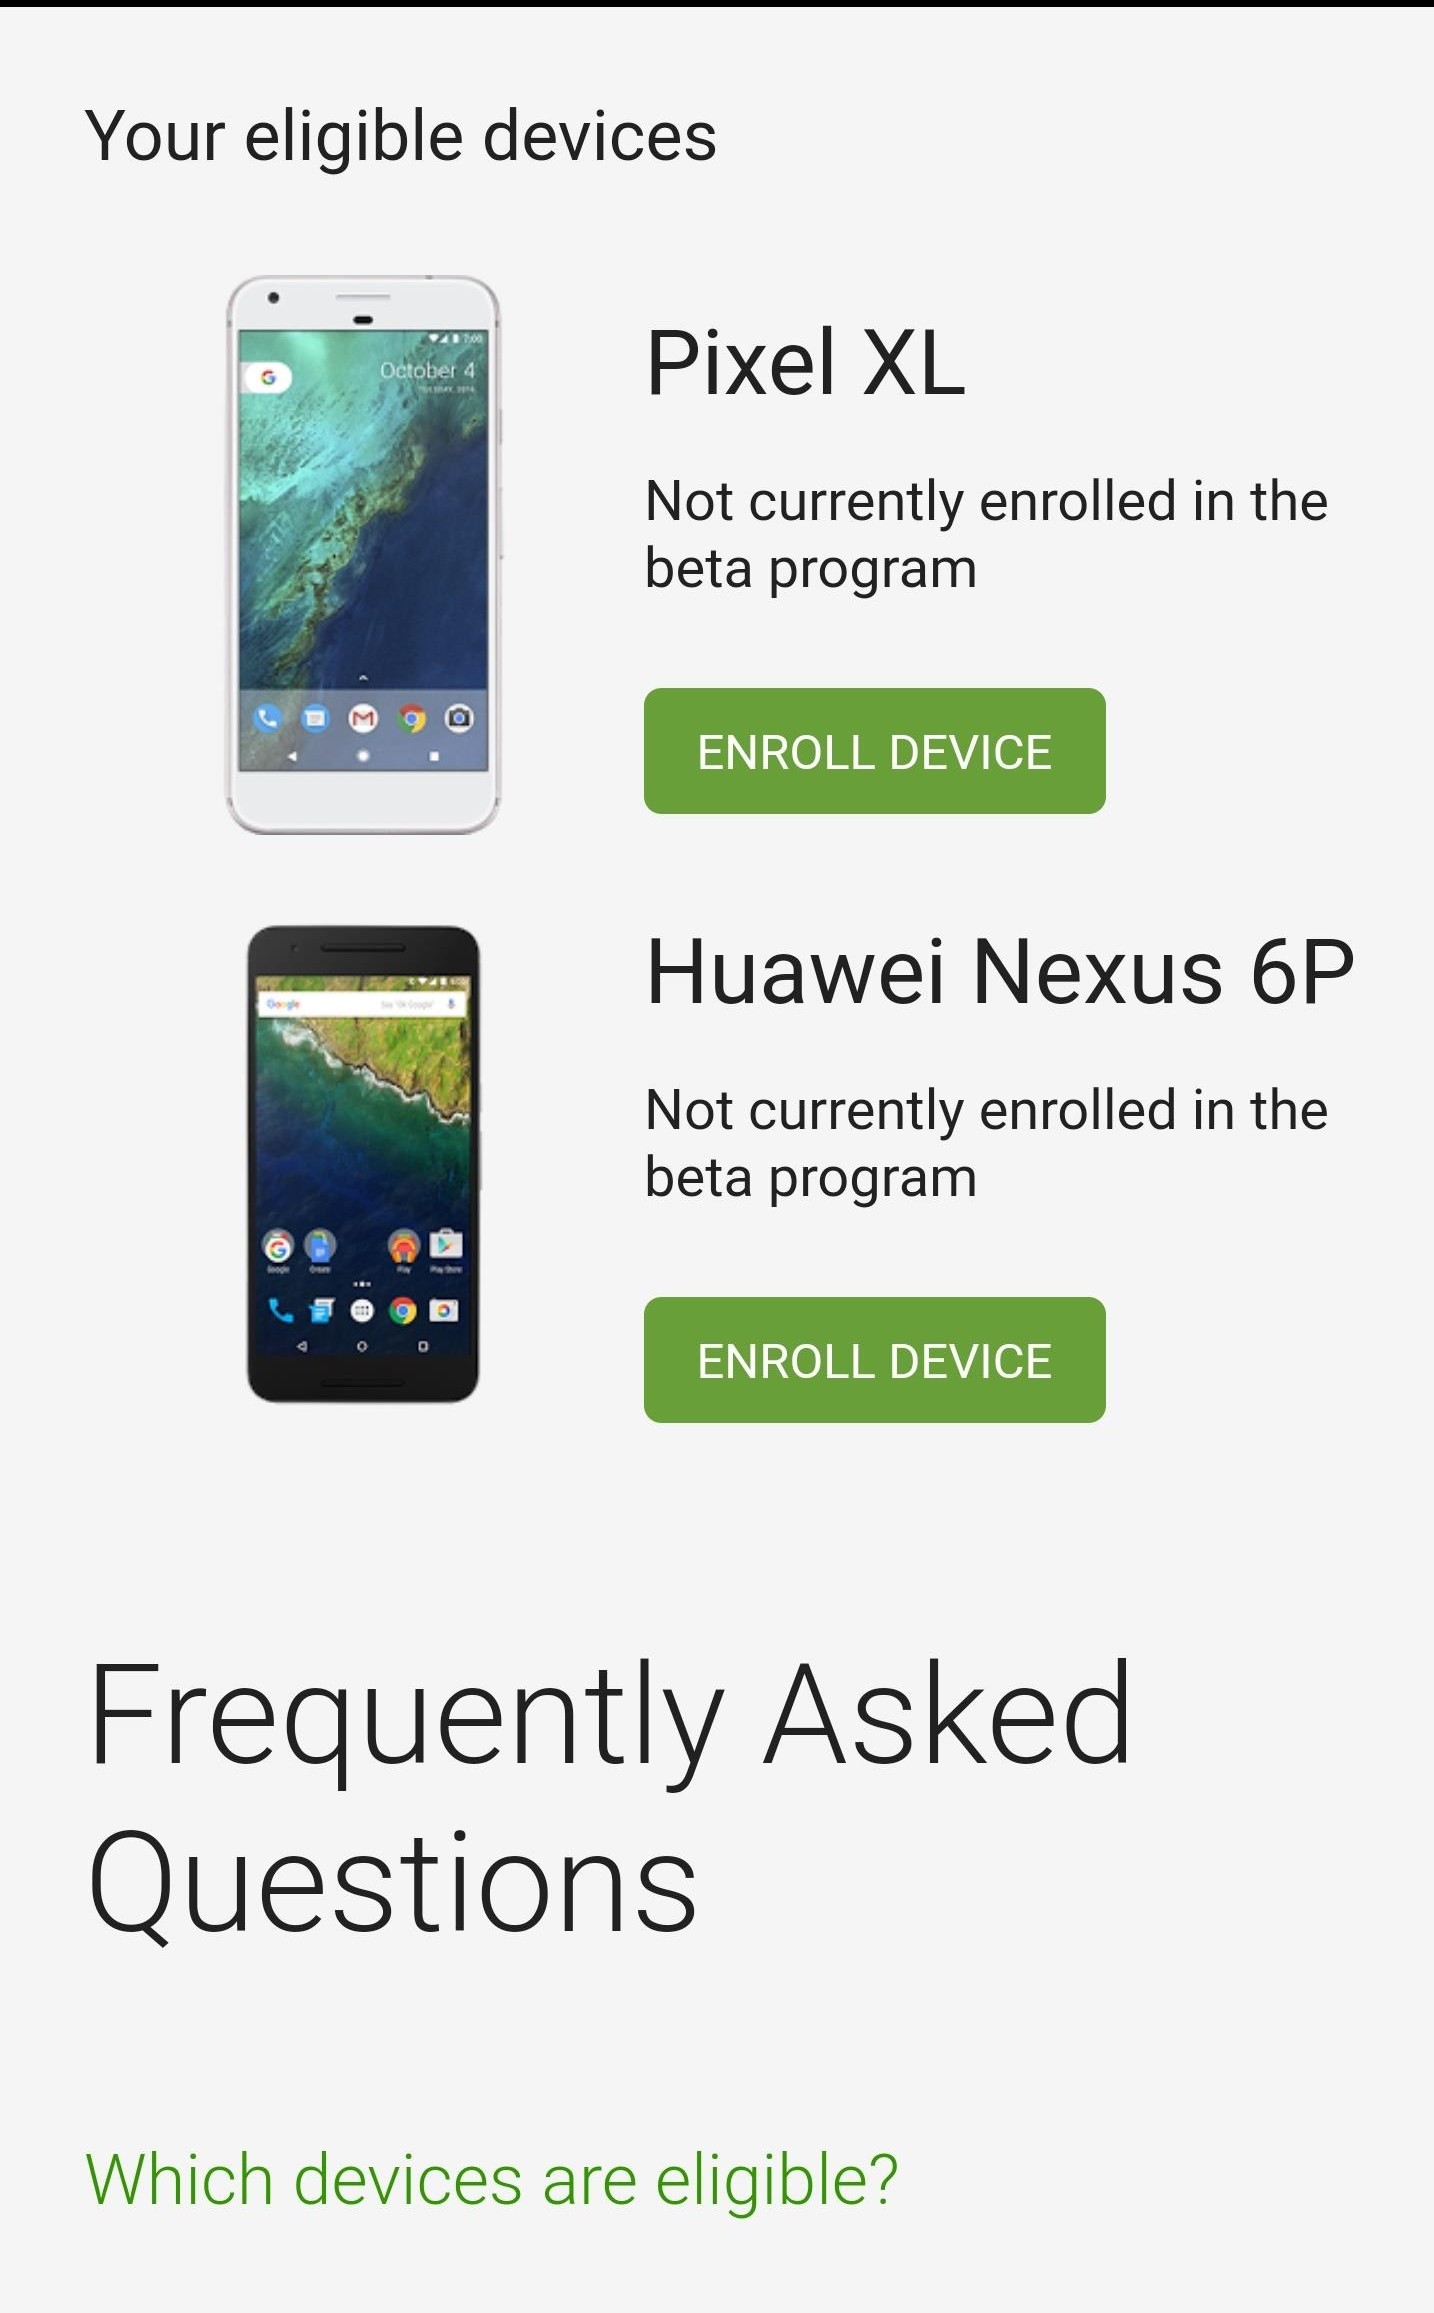 Eligible devices